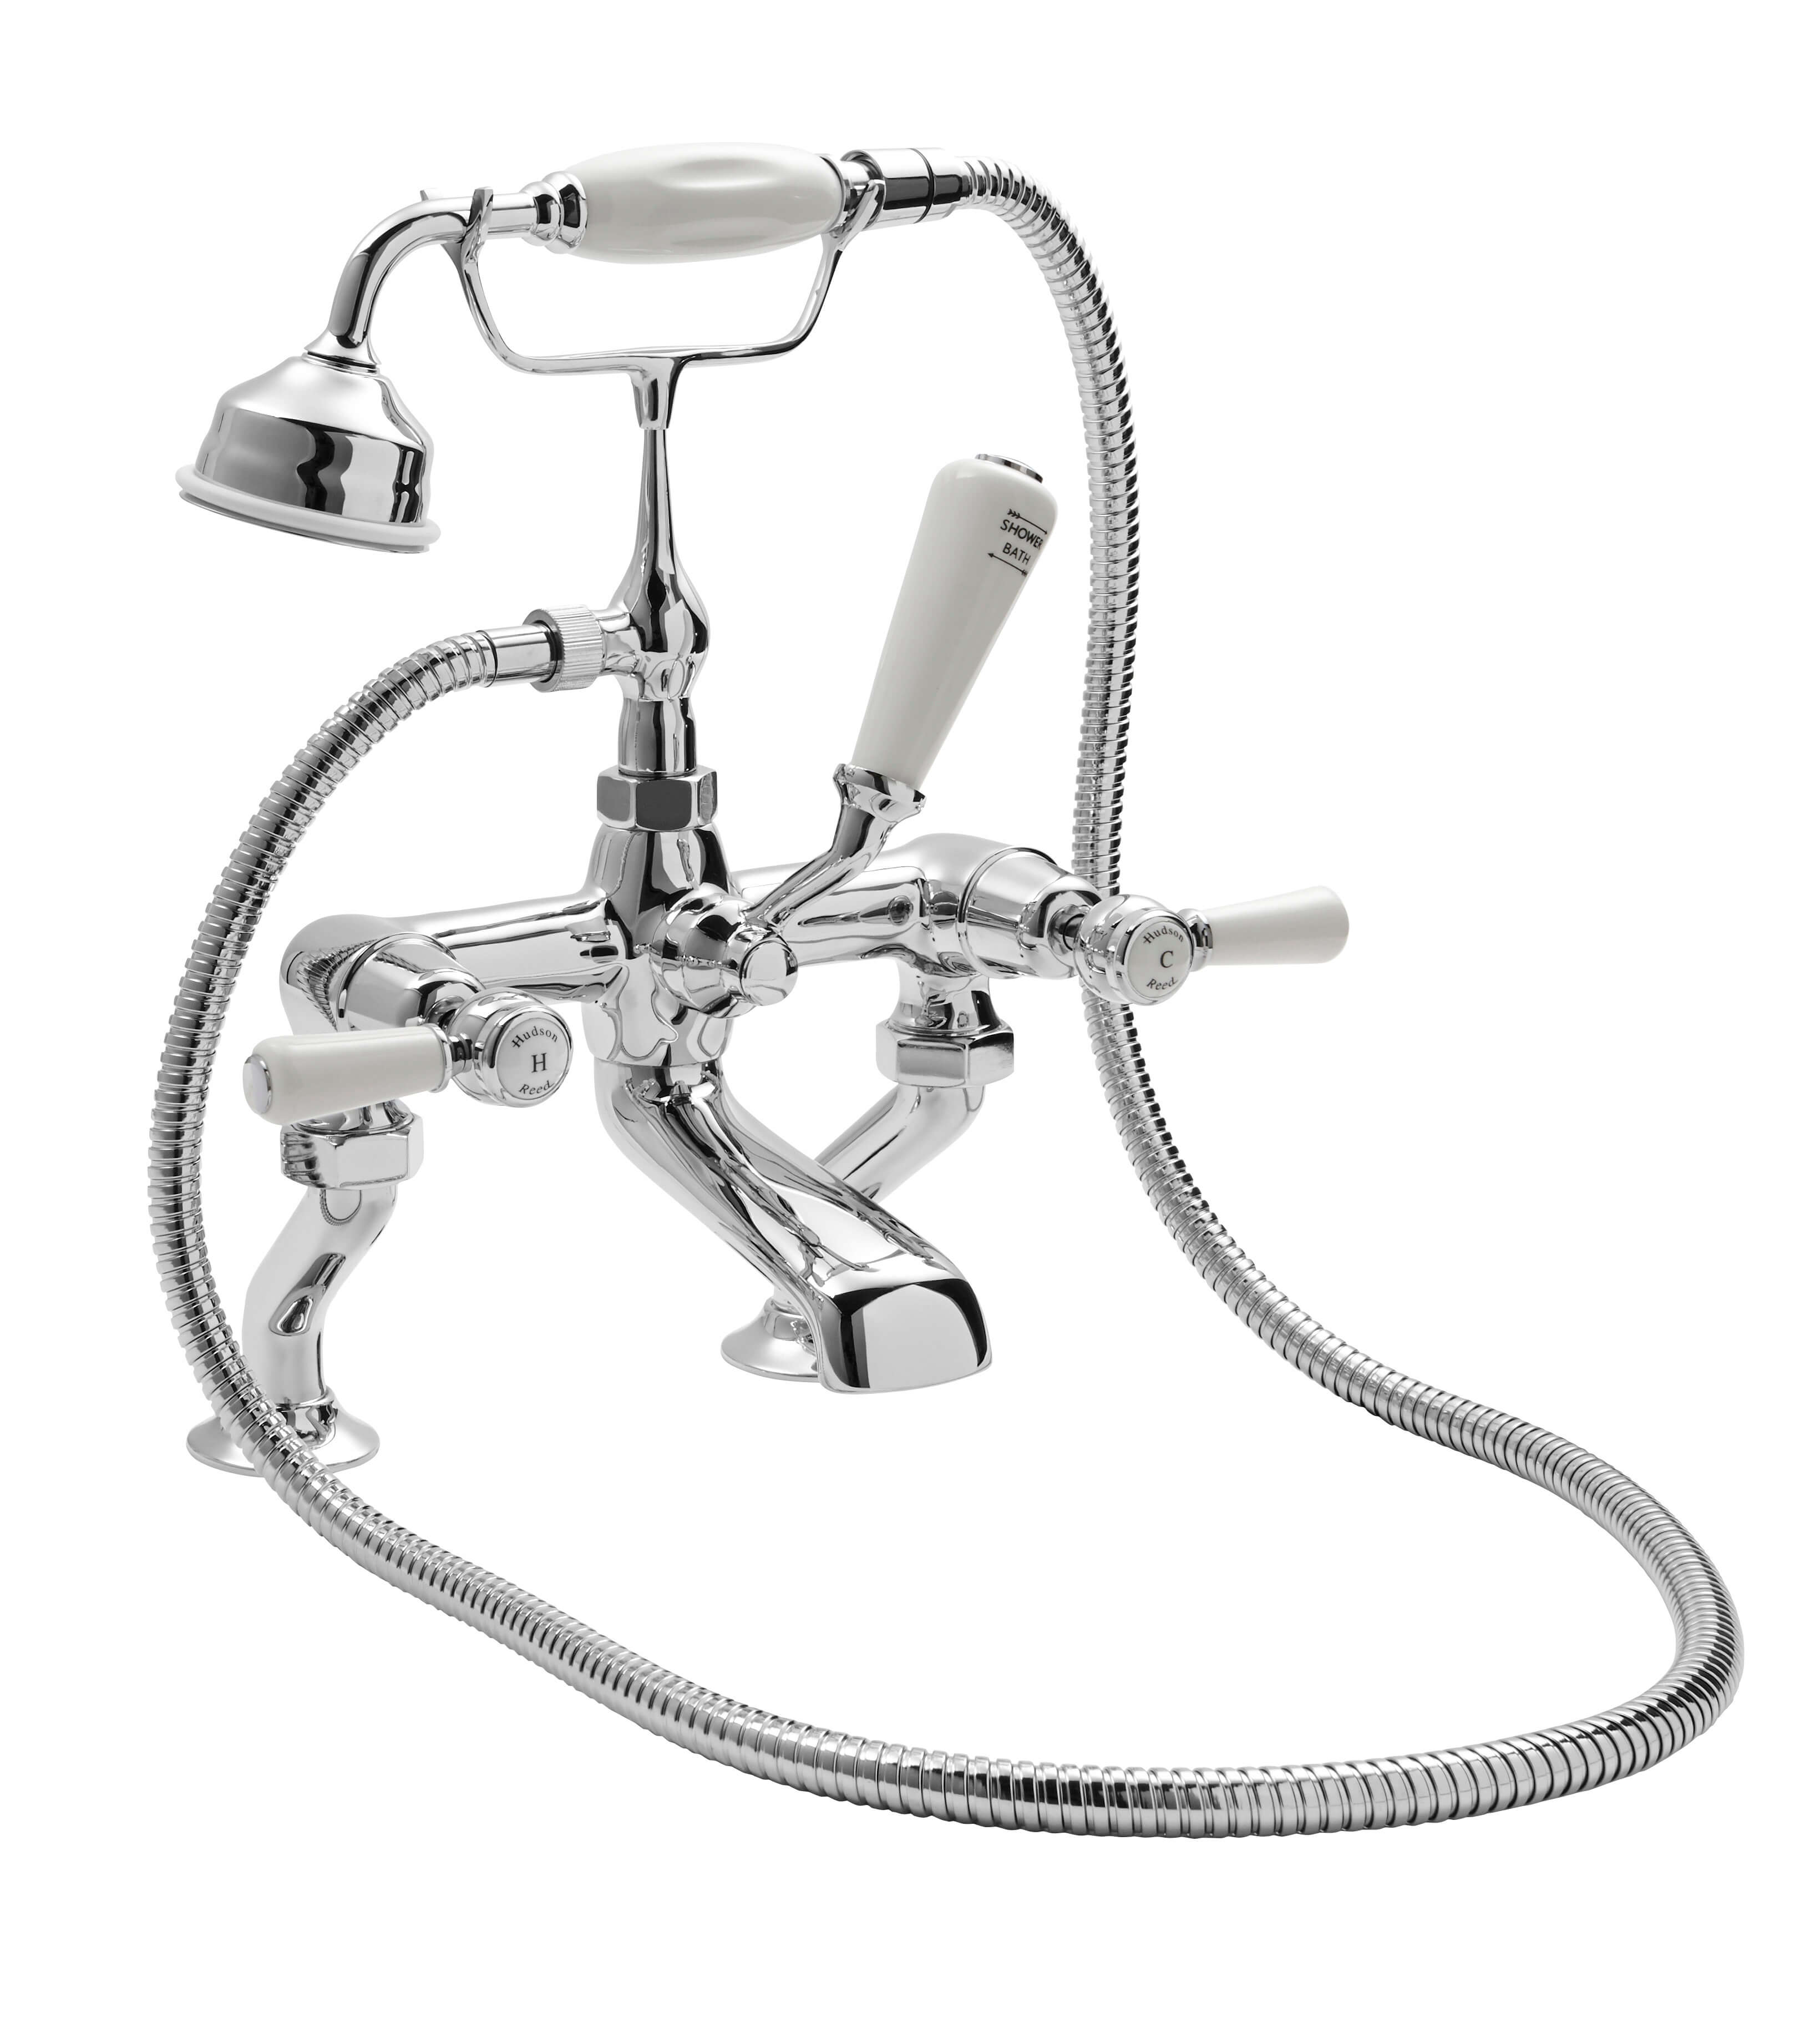 Hudson Reed Topaz with Lever Deck Mounted Bath Shower Mixer & Domed Collar - White BC304DL (2458)